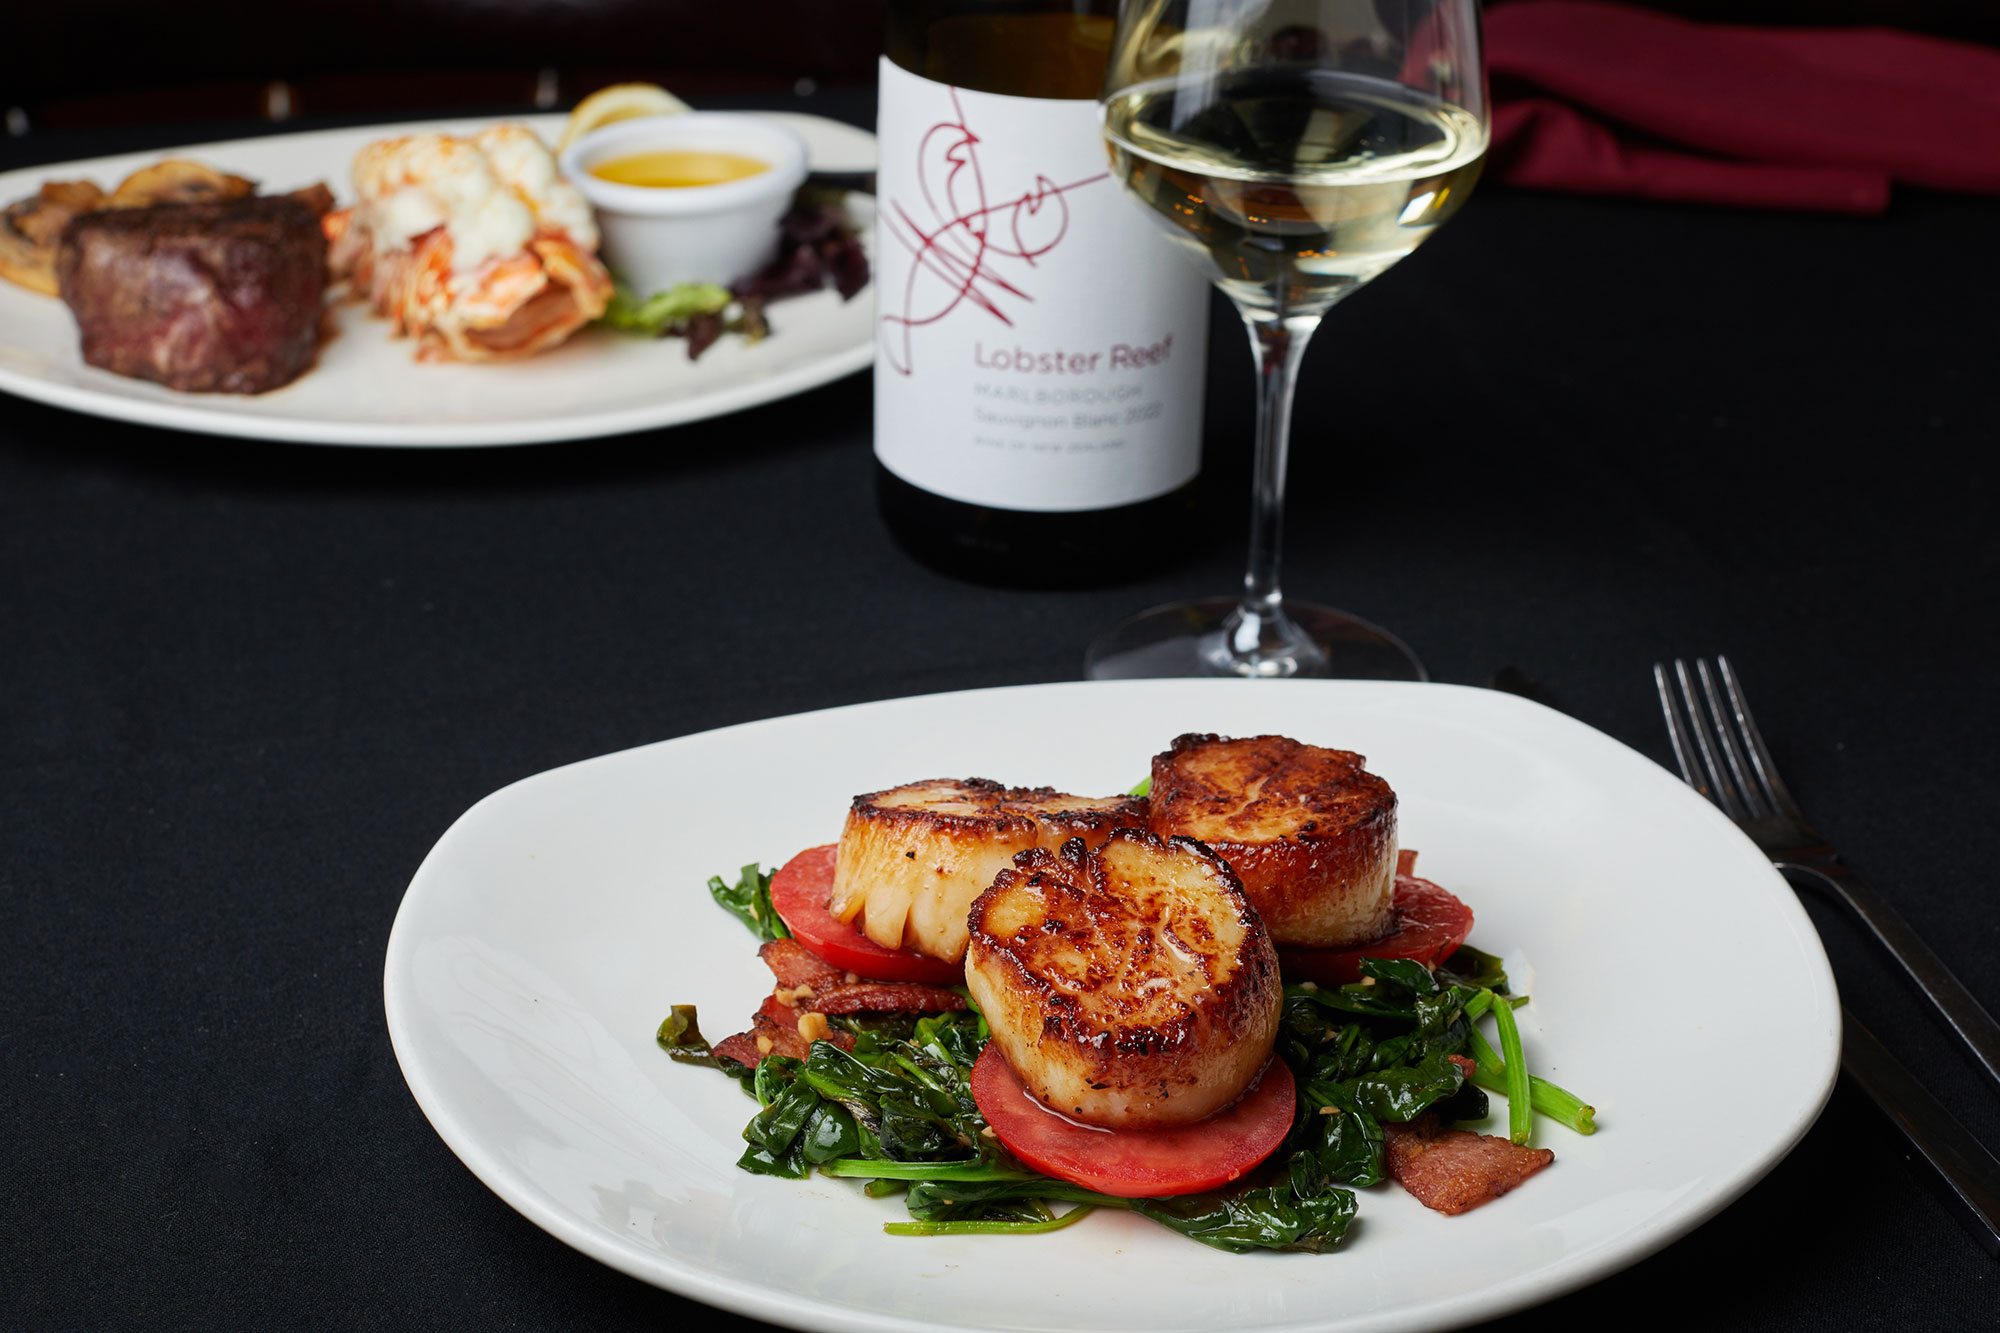 Seared scallops, with tomato and spinach